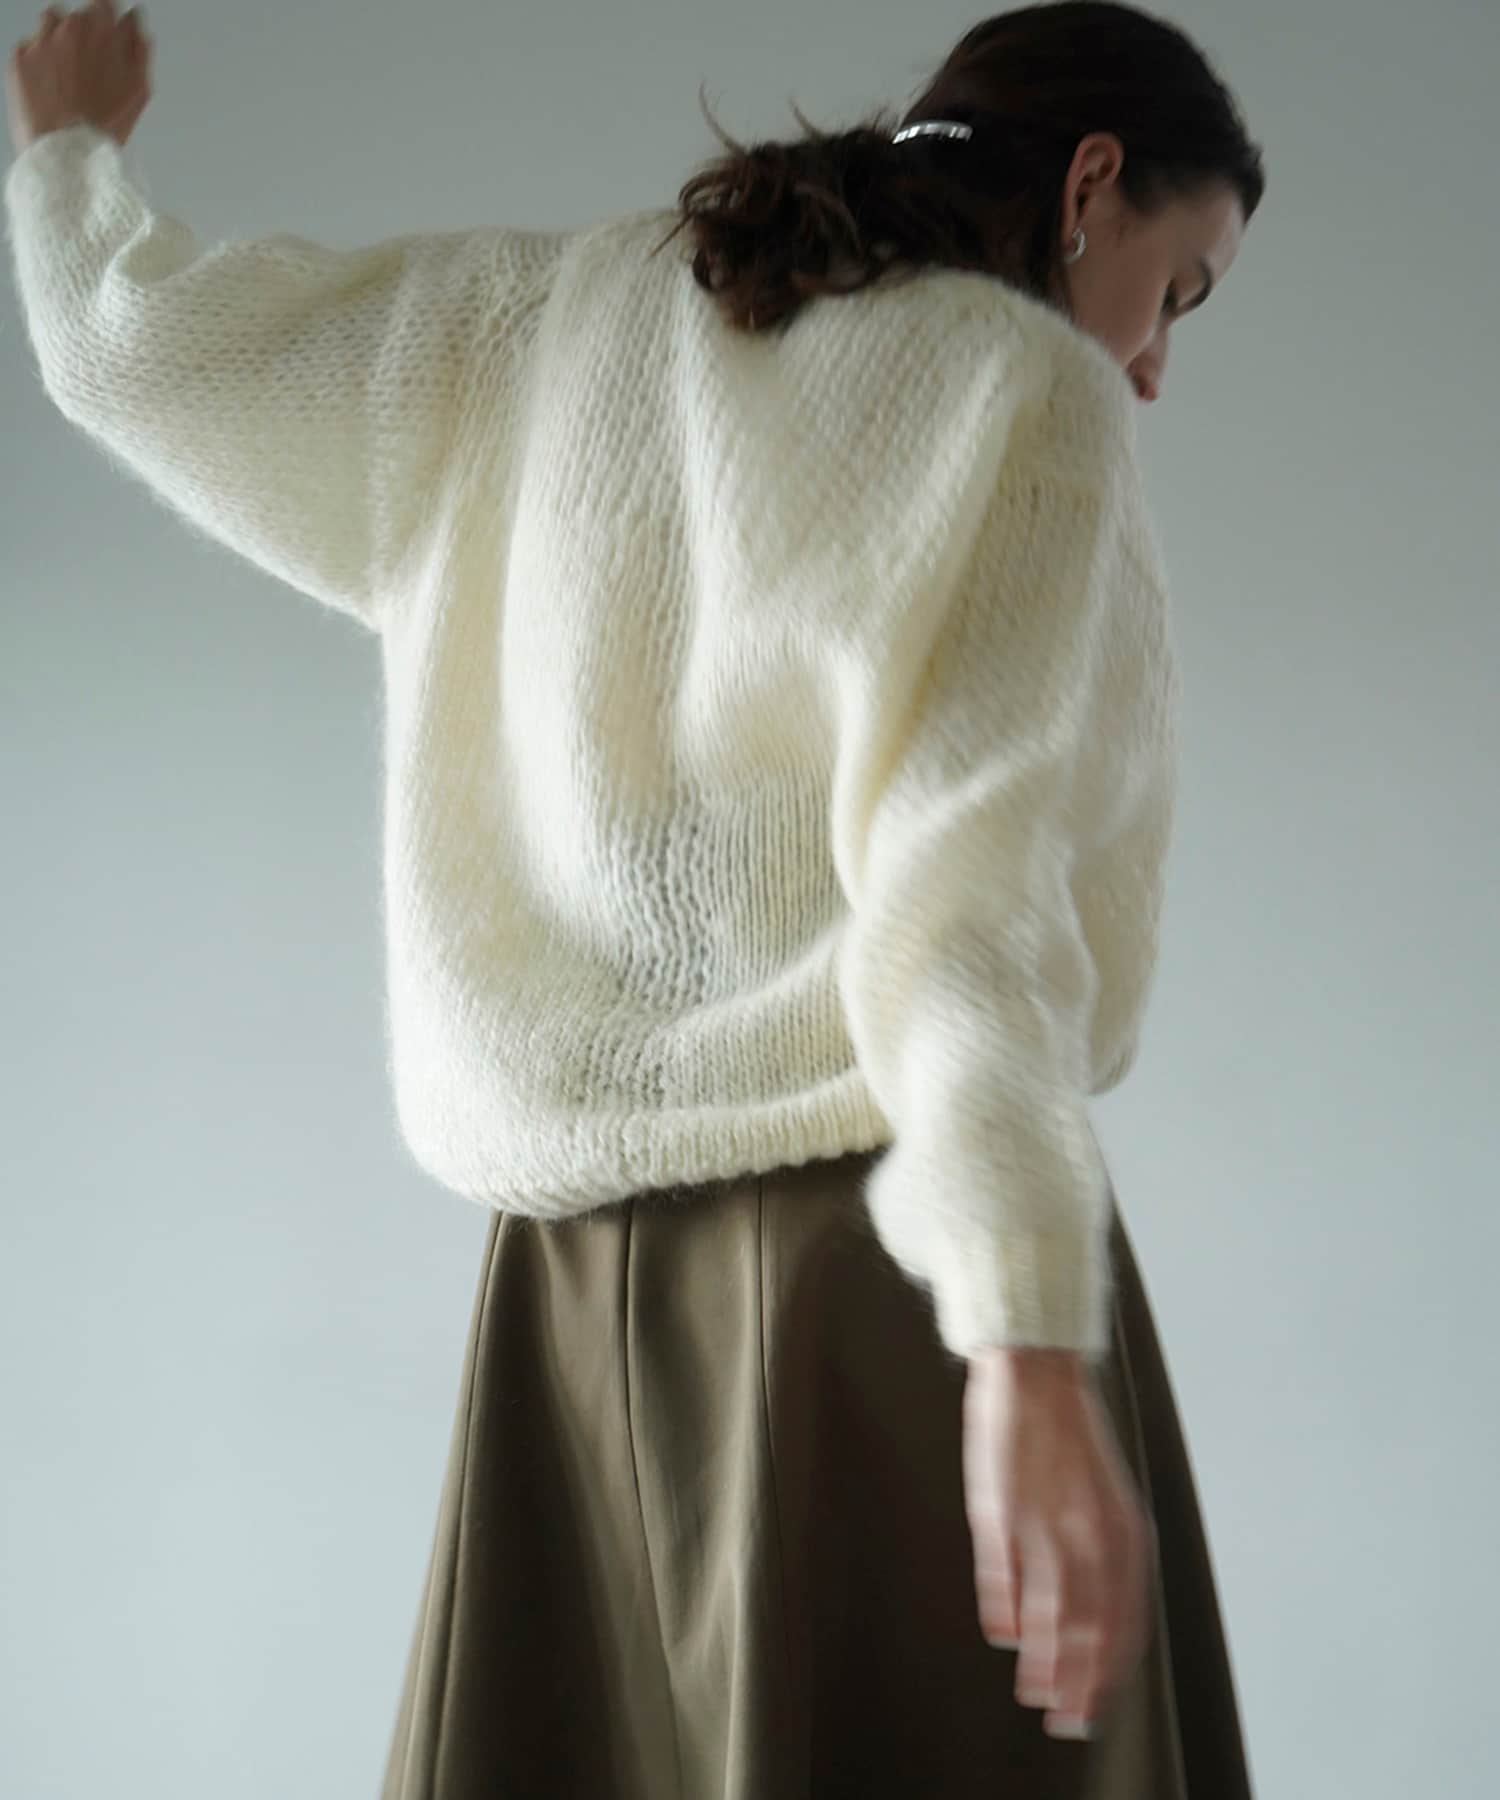 HALF SHEER LOOSE MOHAIR KNIT TOPS(1 IVORY): CLANE: WOMENS